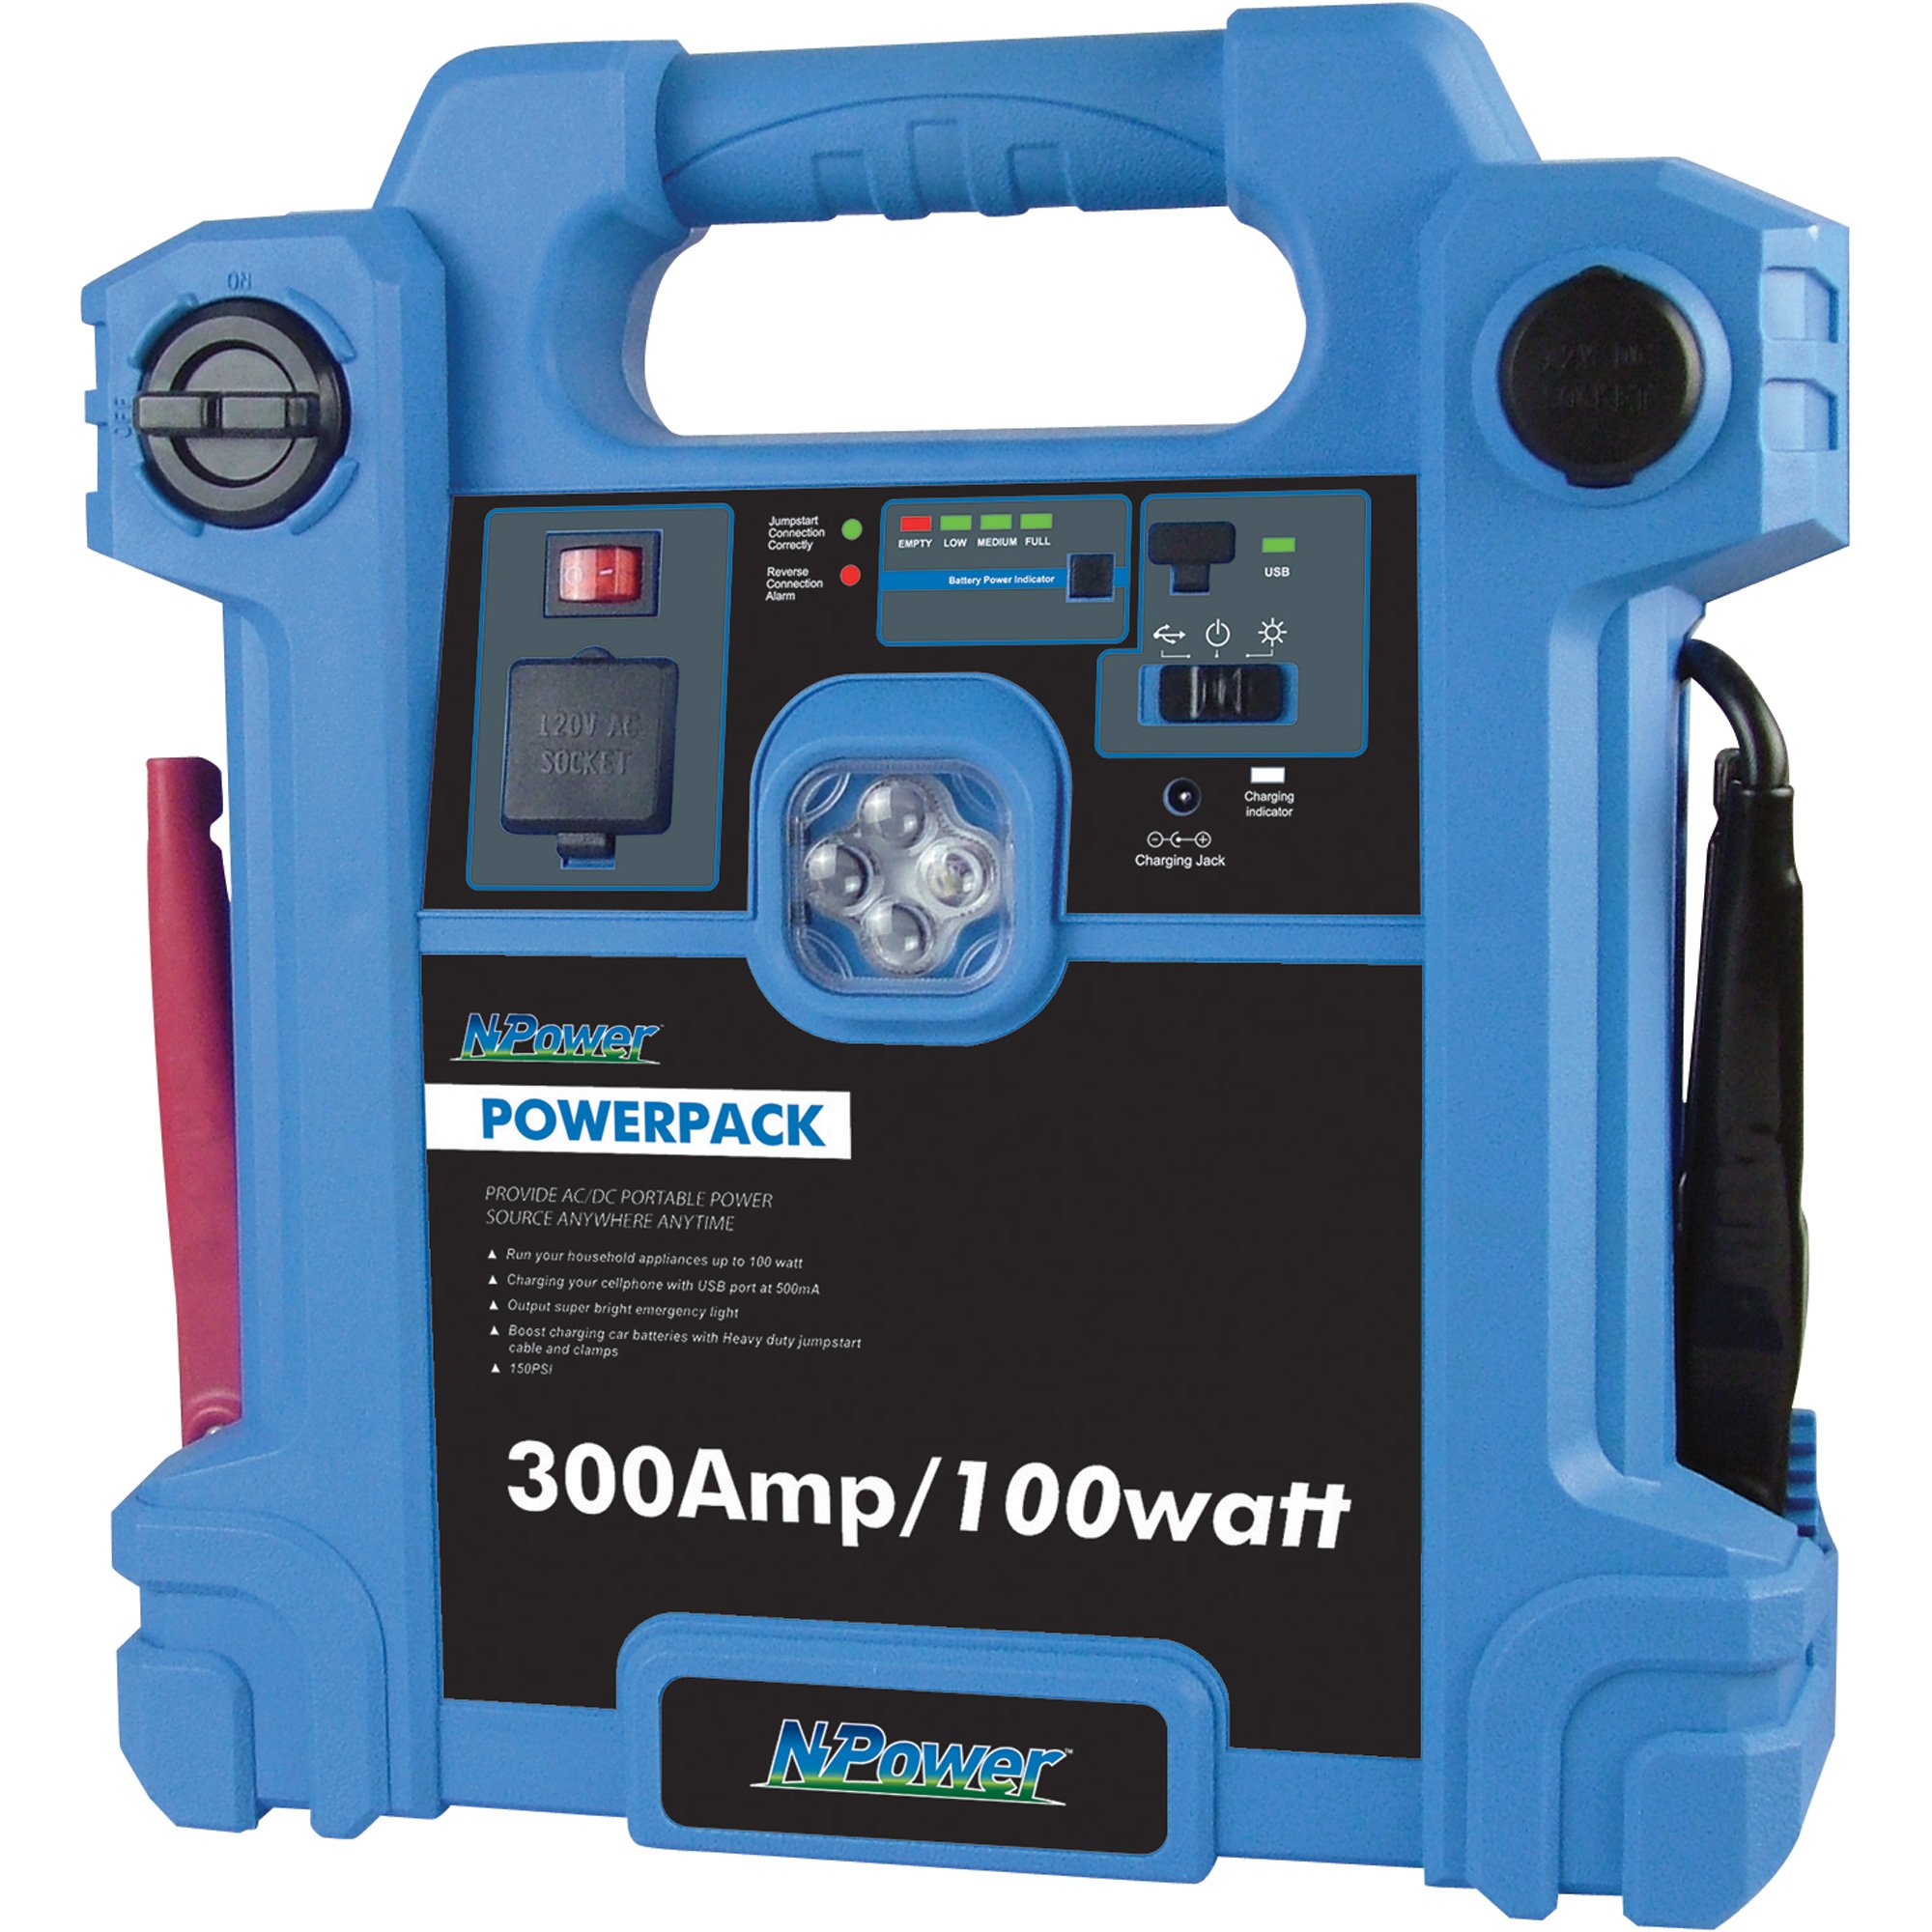 NPower Powerpack Emergency Power Source with Air Compressor — 300